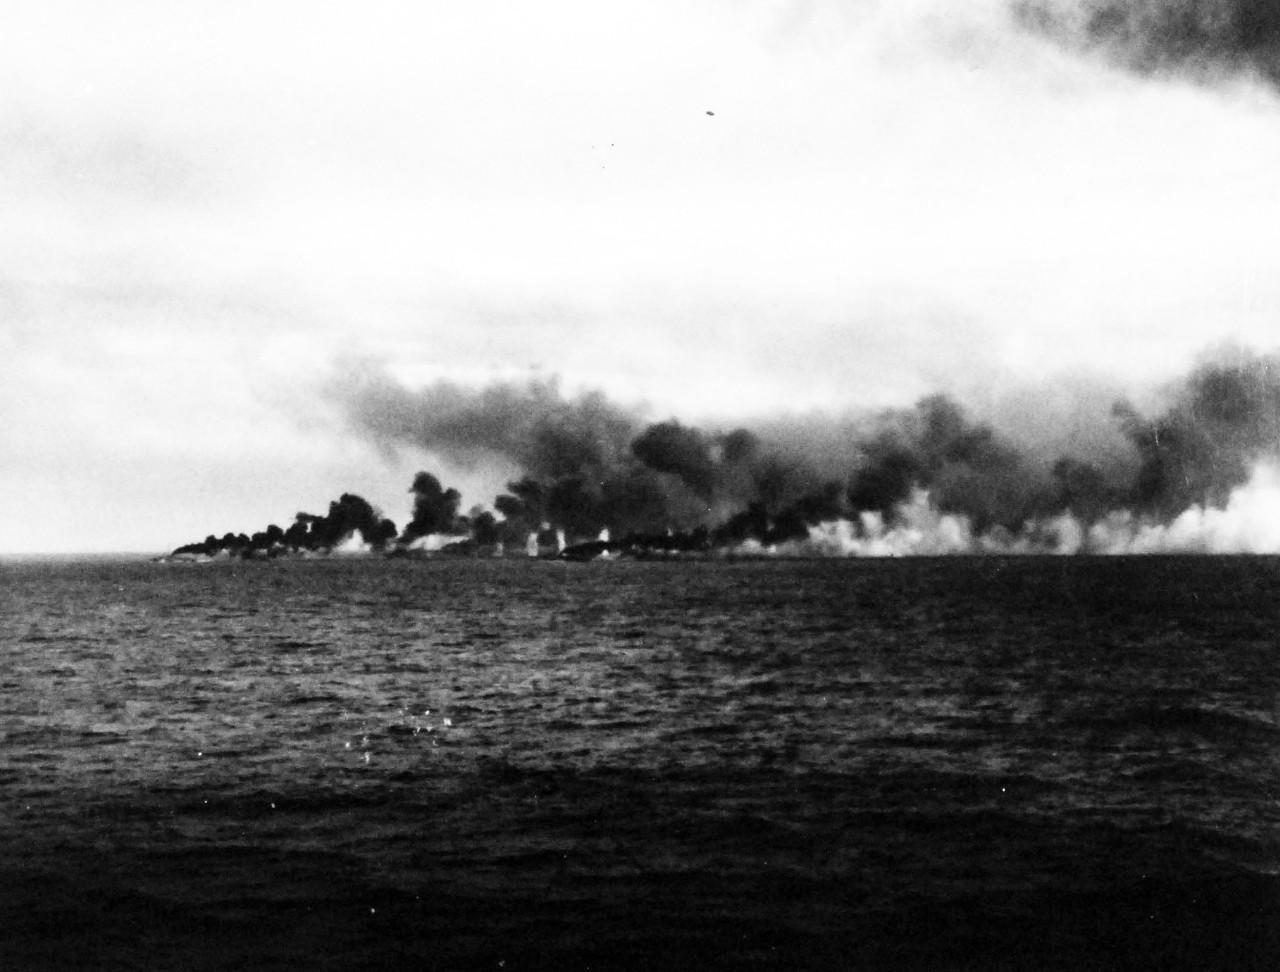 80-G-47038:   Battle off Samar, October 25, 1944.   Allied fleet is attacked by Japanese off Leyte.   Black smoke rising from funnels of CVEs.  Seen from USS Kitkun Bay (CVE 71).   DDs and Des lay smoke while being shelled by Japanese fleet.   Official U.S. Navy Photograph, now in the collections of the National Archives.  (2014/4/17).  